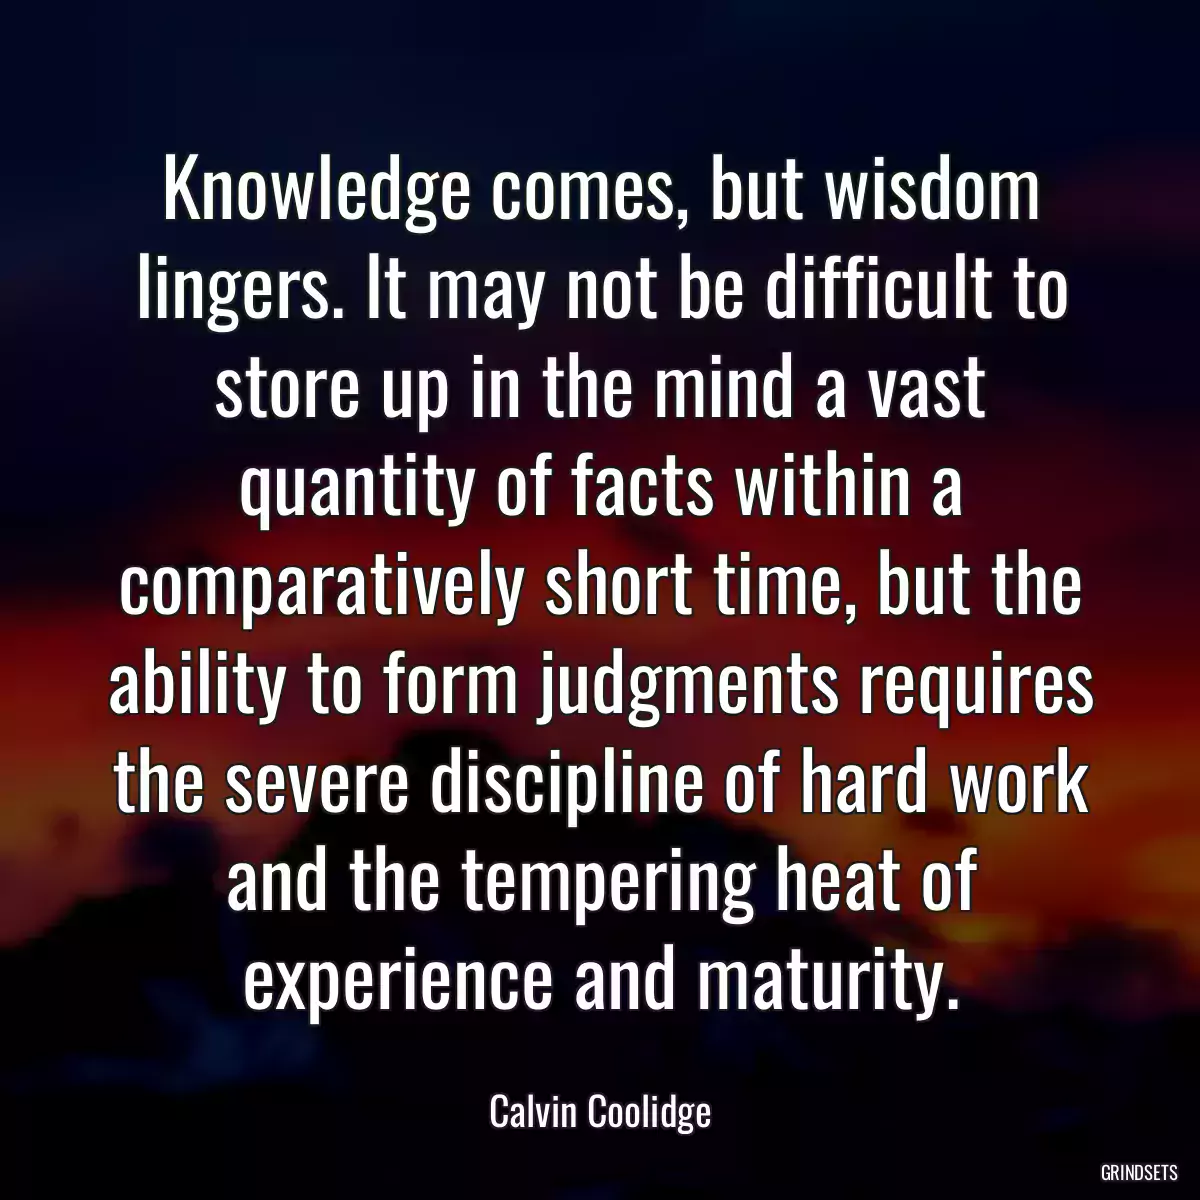 Knowledge comes, but wisdom lingers. It may not be difficult to store up in the mind a vast quantity of facts within a comparatively short time, but the ability to form judgments requires the severe discipline of hard work and the tempering heat of experience and maturity.